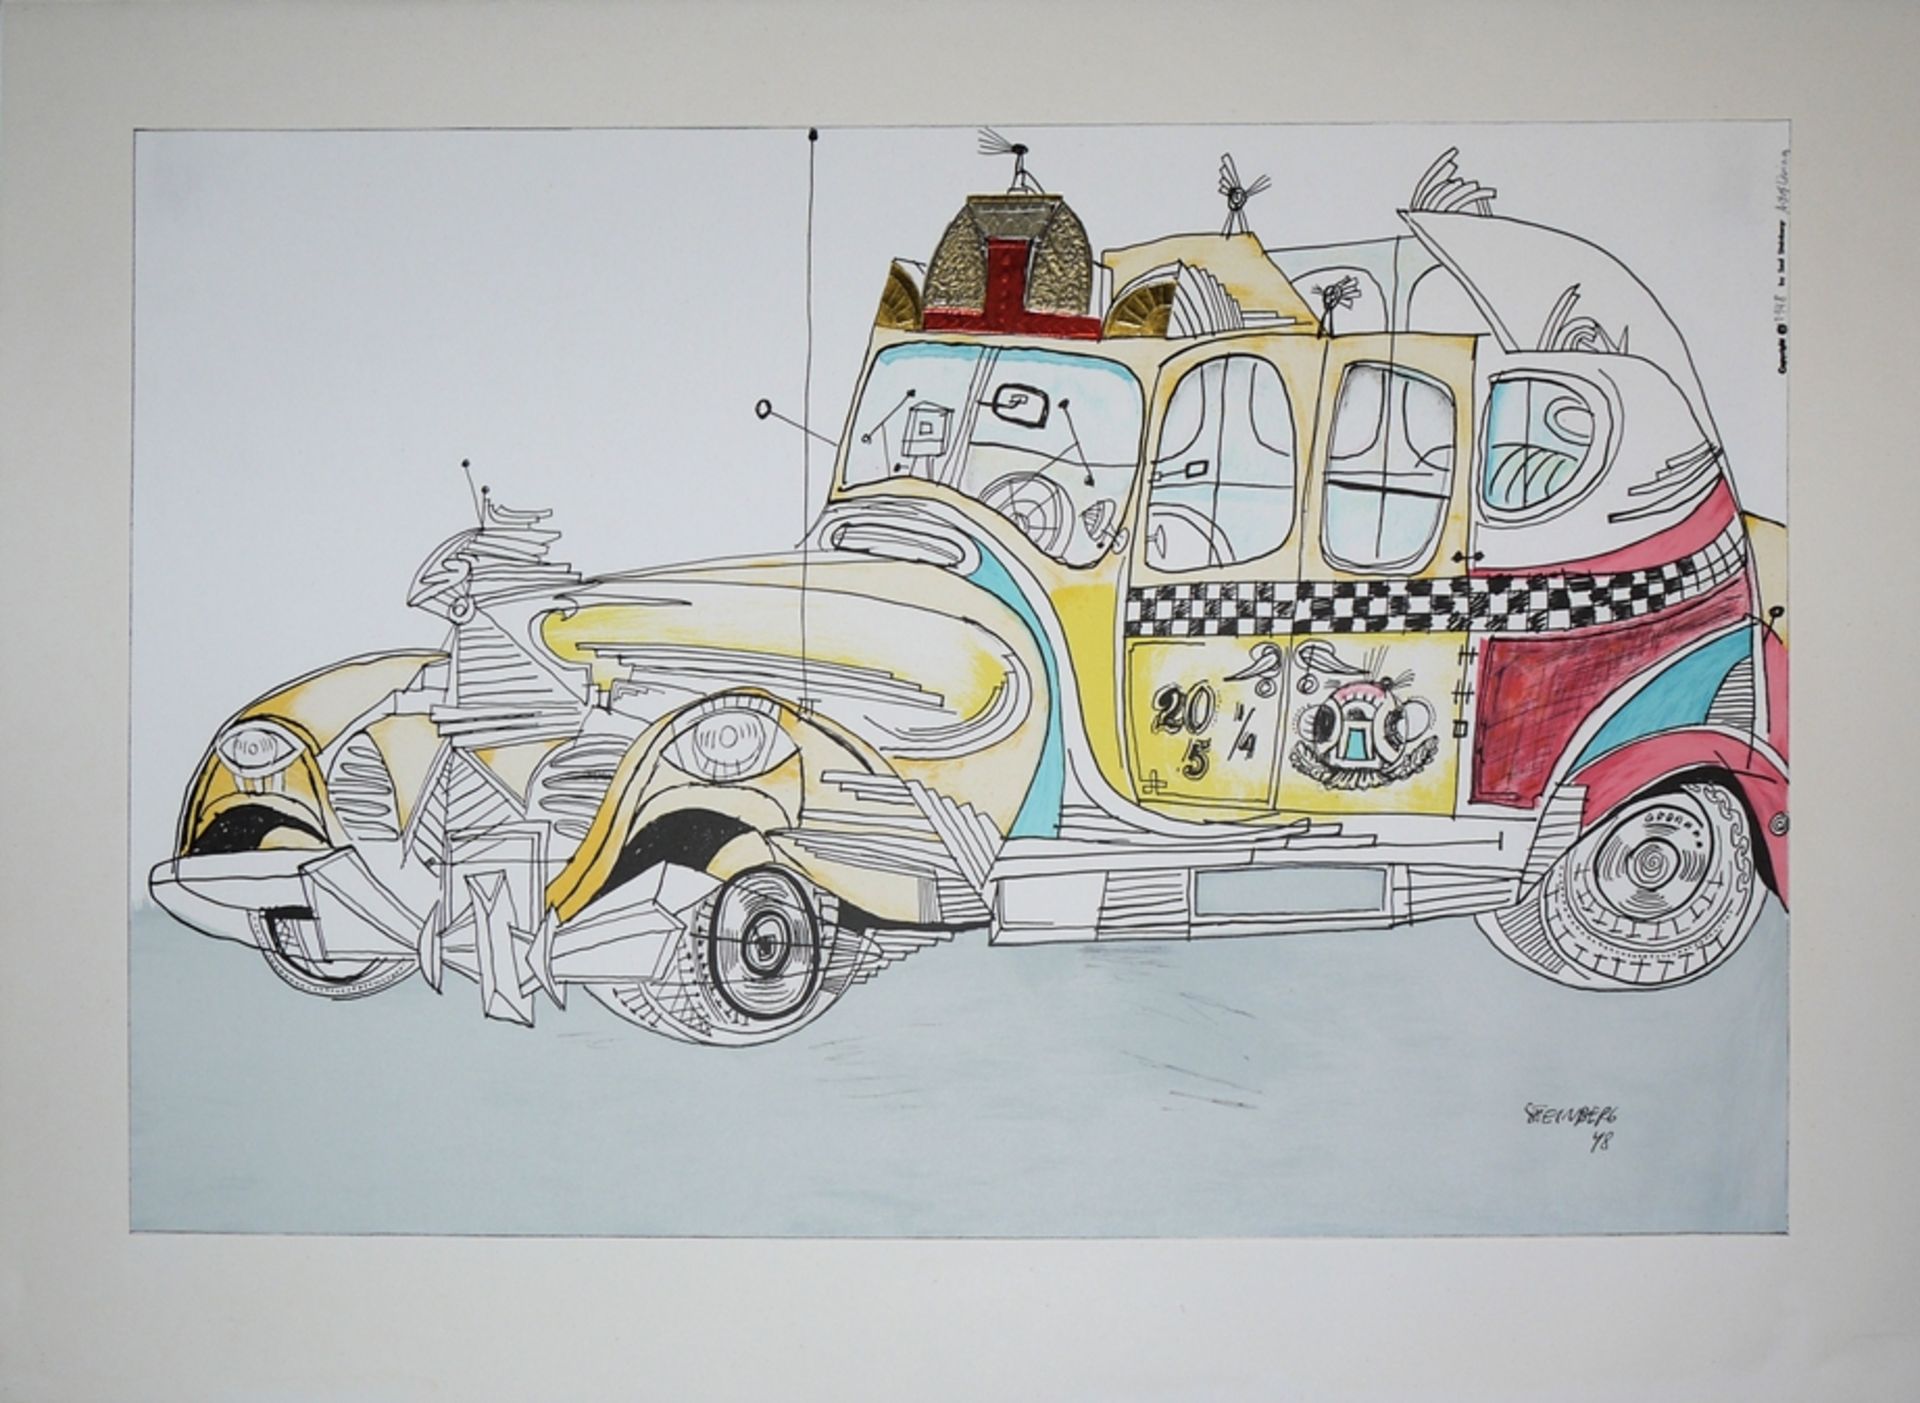 7 x Art for Car and Automobile Fans: Louis Baillon, Paul Bracq, Andreas Hentrich, Simon Loasby, Ern - Image 6 of 13